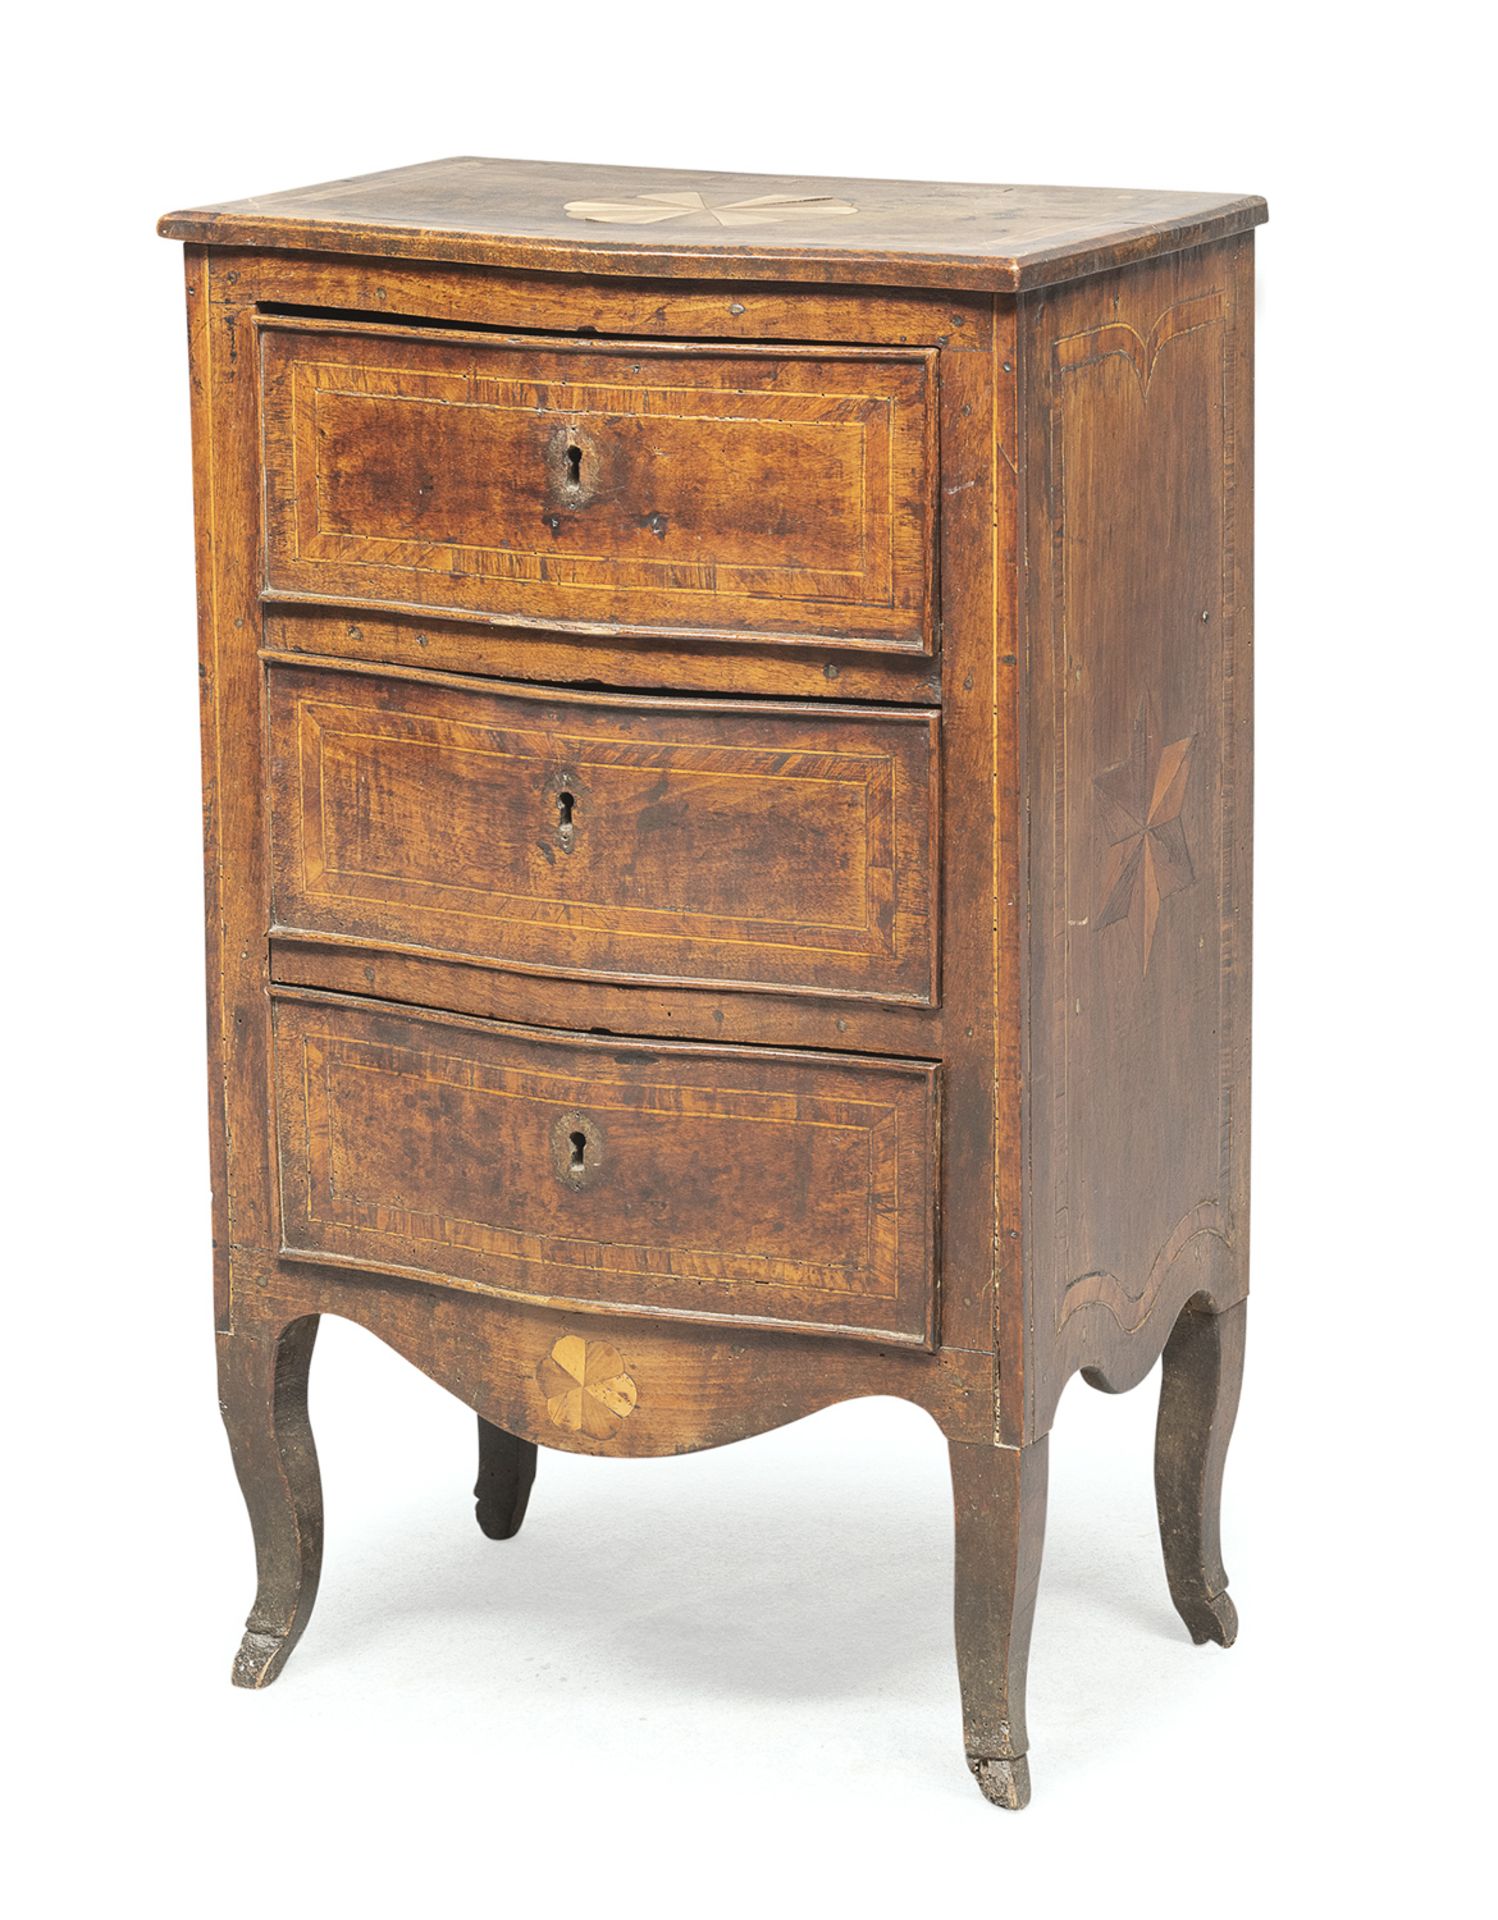 BEDSIDE TABLE IN WALNUT PROBABLY NAPLES 18TH CENTURY